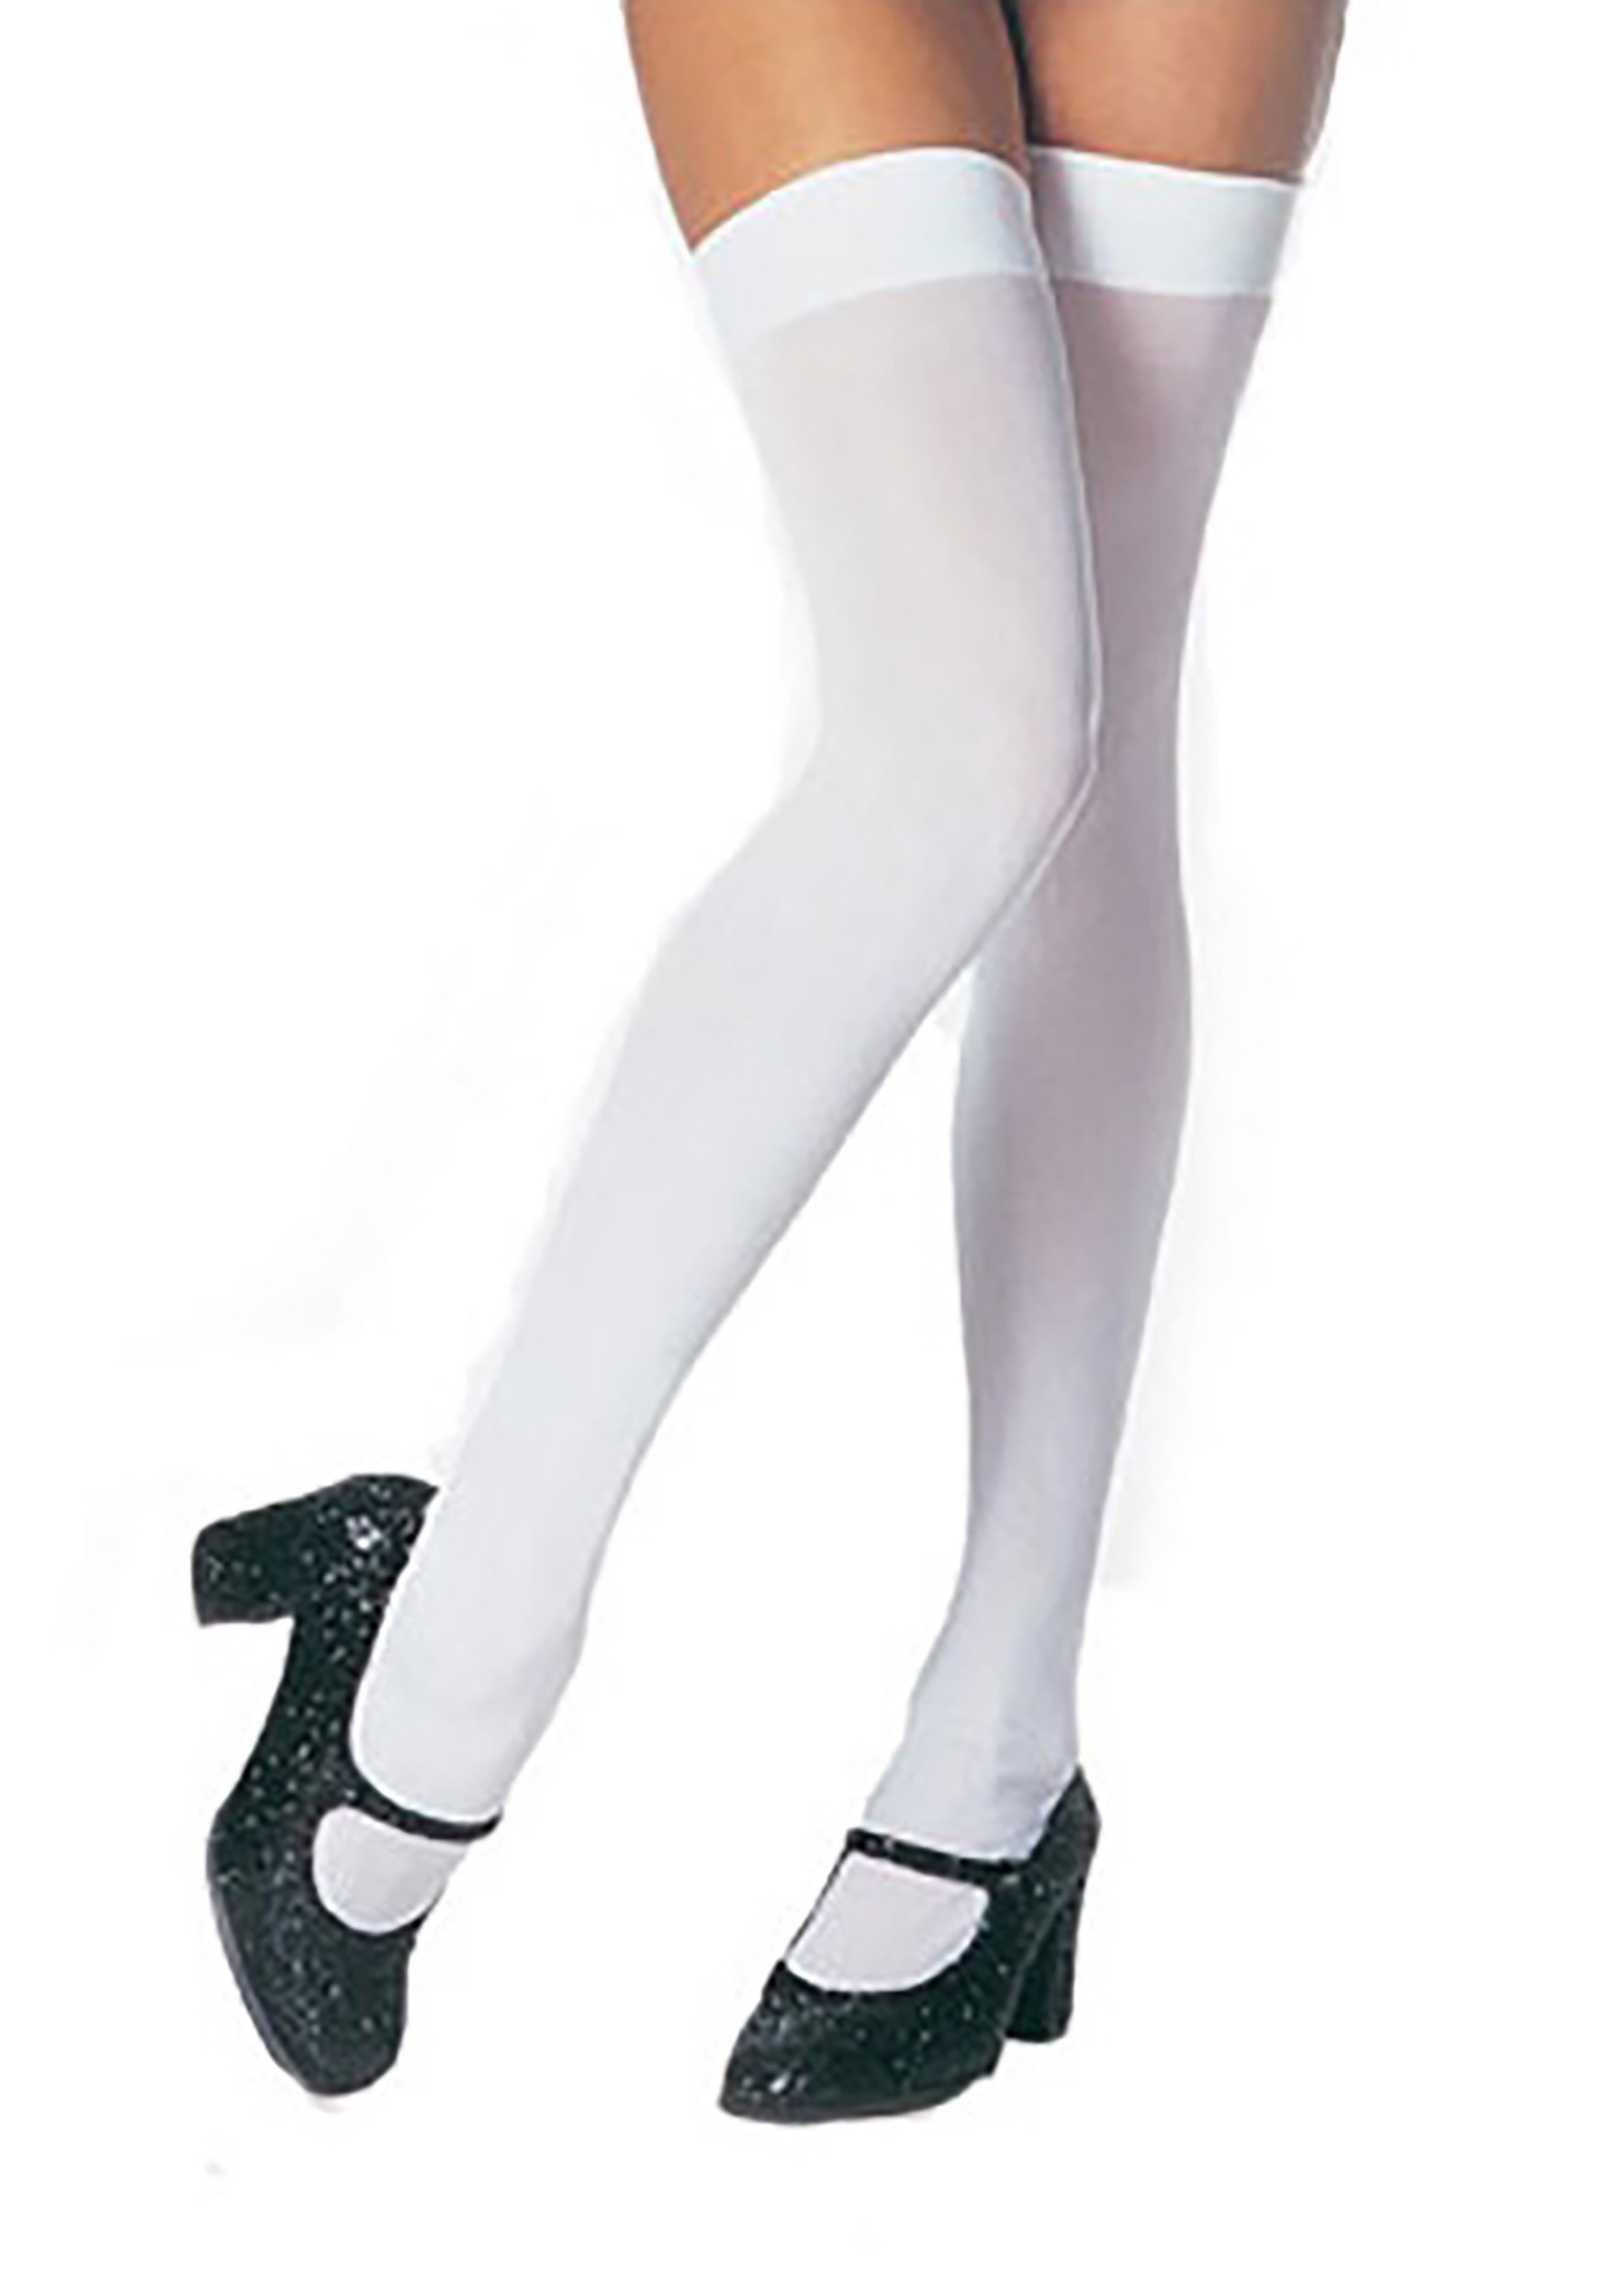 https://images.halloweencostumes.com/products/6618/1-1/plus-size-thigh-high-white-stockings.jpg